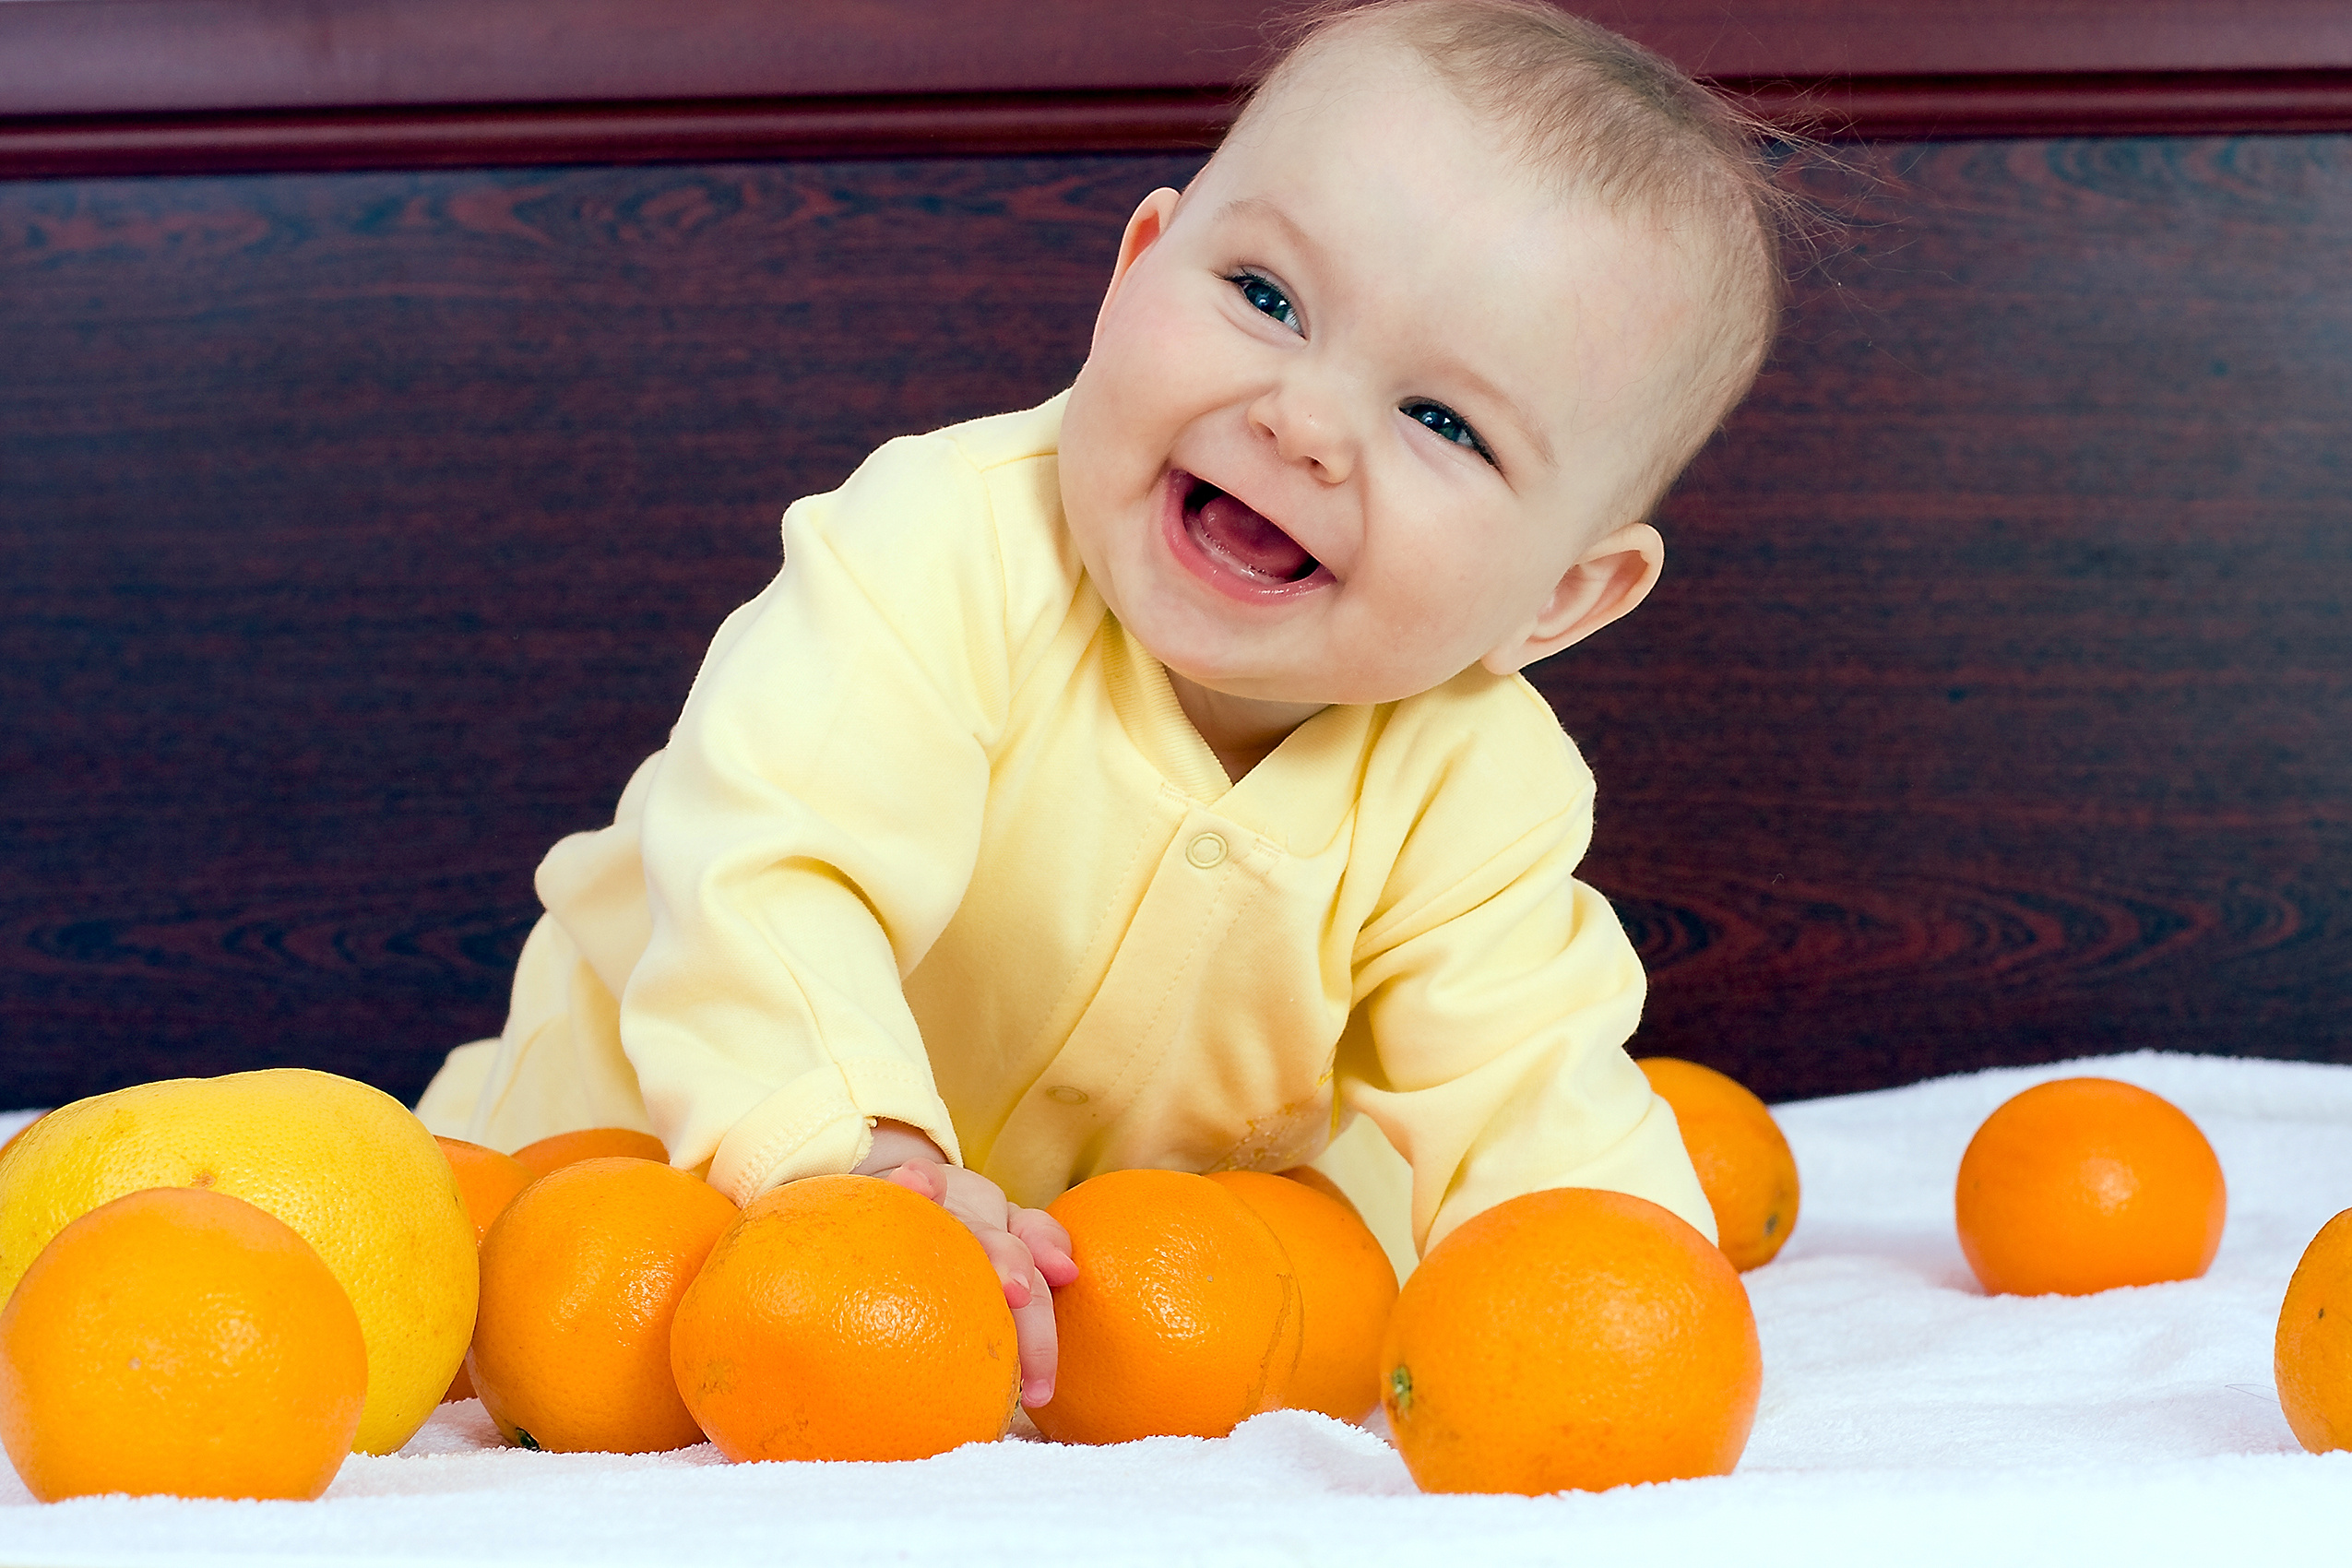 Baby plays with oranges fruits